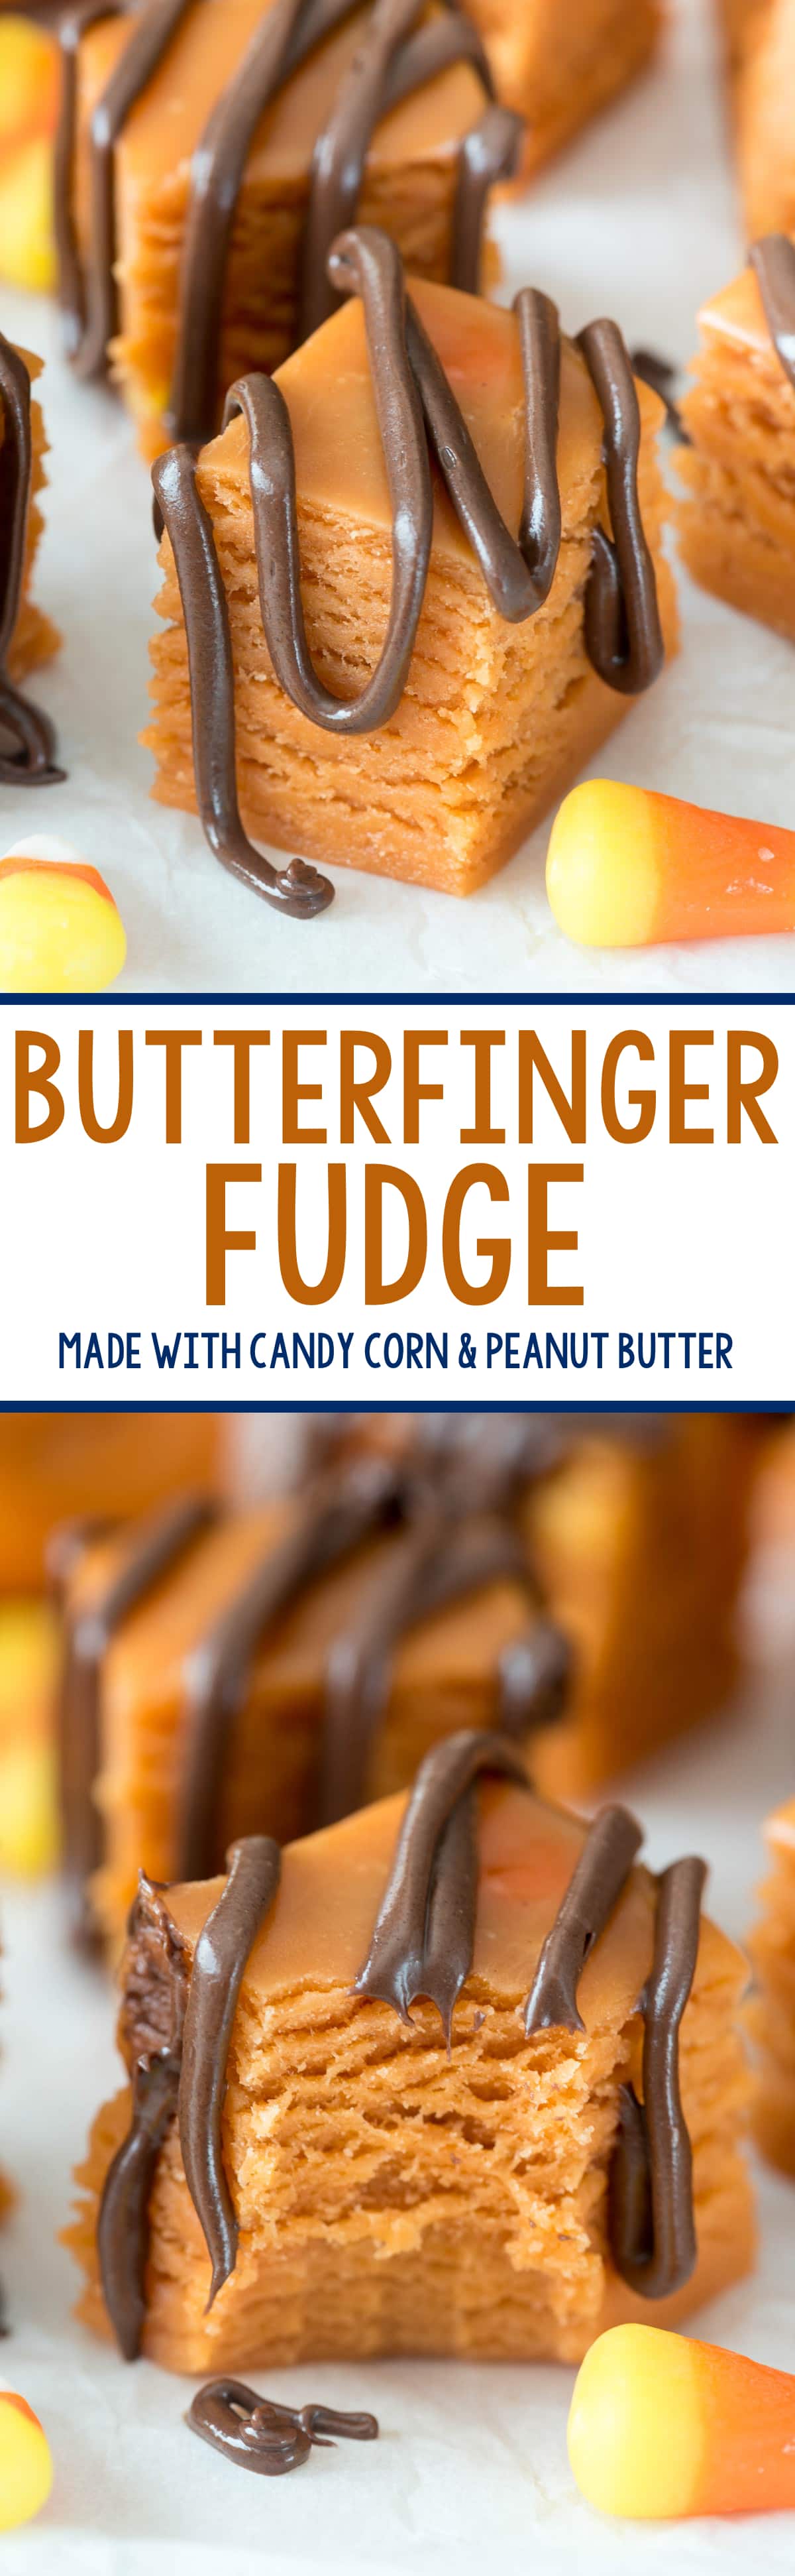 This easy 3-ingredient Butterfinger Fudge tastes just like the candy bar and it's made with candy corn!